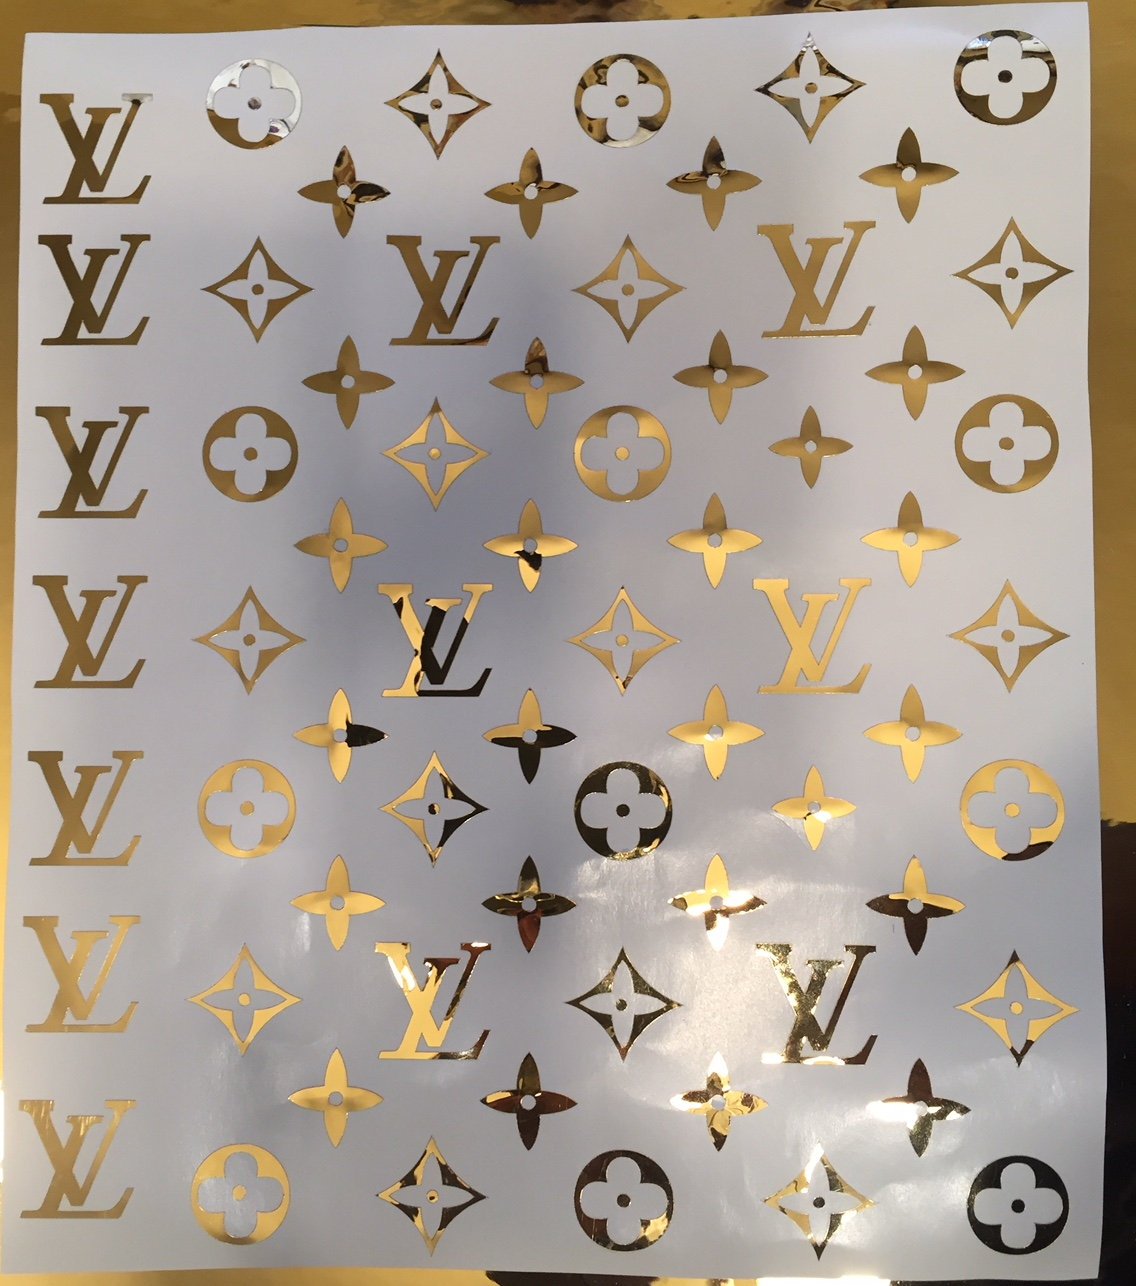 Louis Vuitton Patterns, Vol. 3: Game On by itsfarahbakhsh on